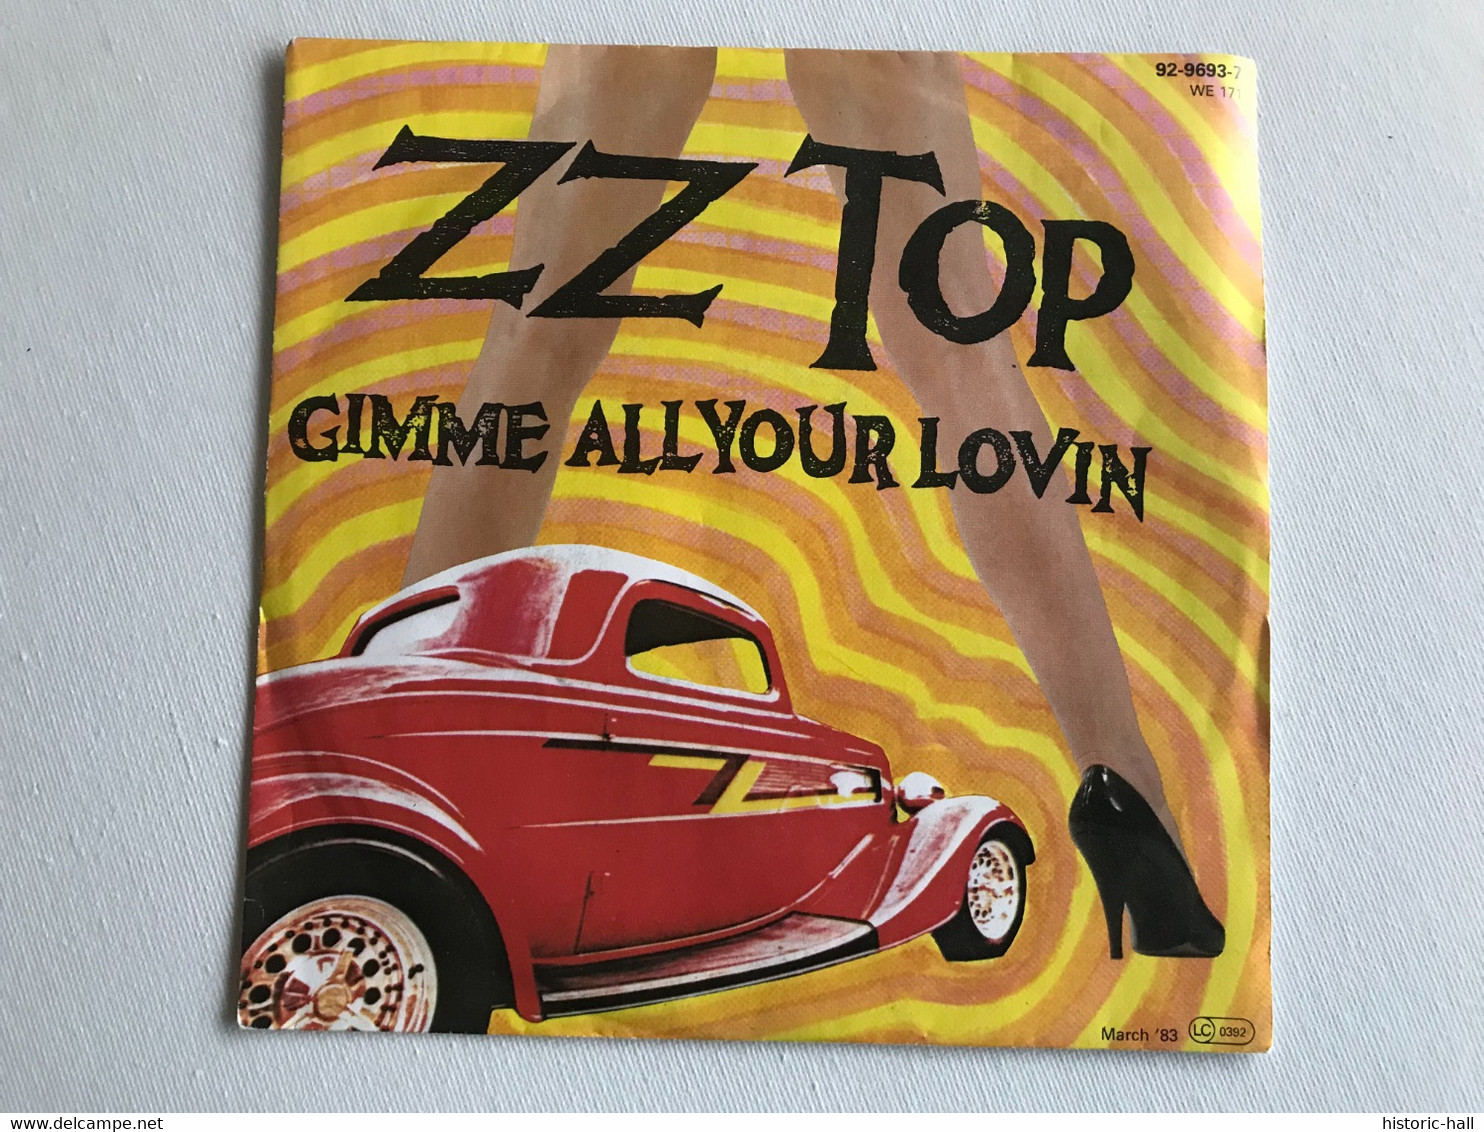 ZZ TOP - Gimmie All Your Lovin - 45t - 1983 - FRENCH Press - Hard Rock & Metal